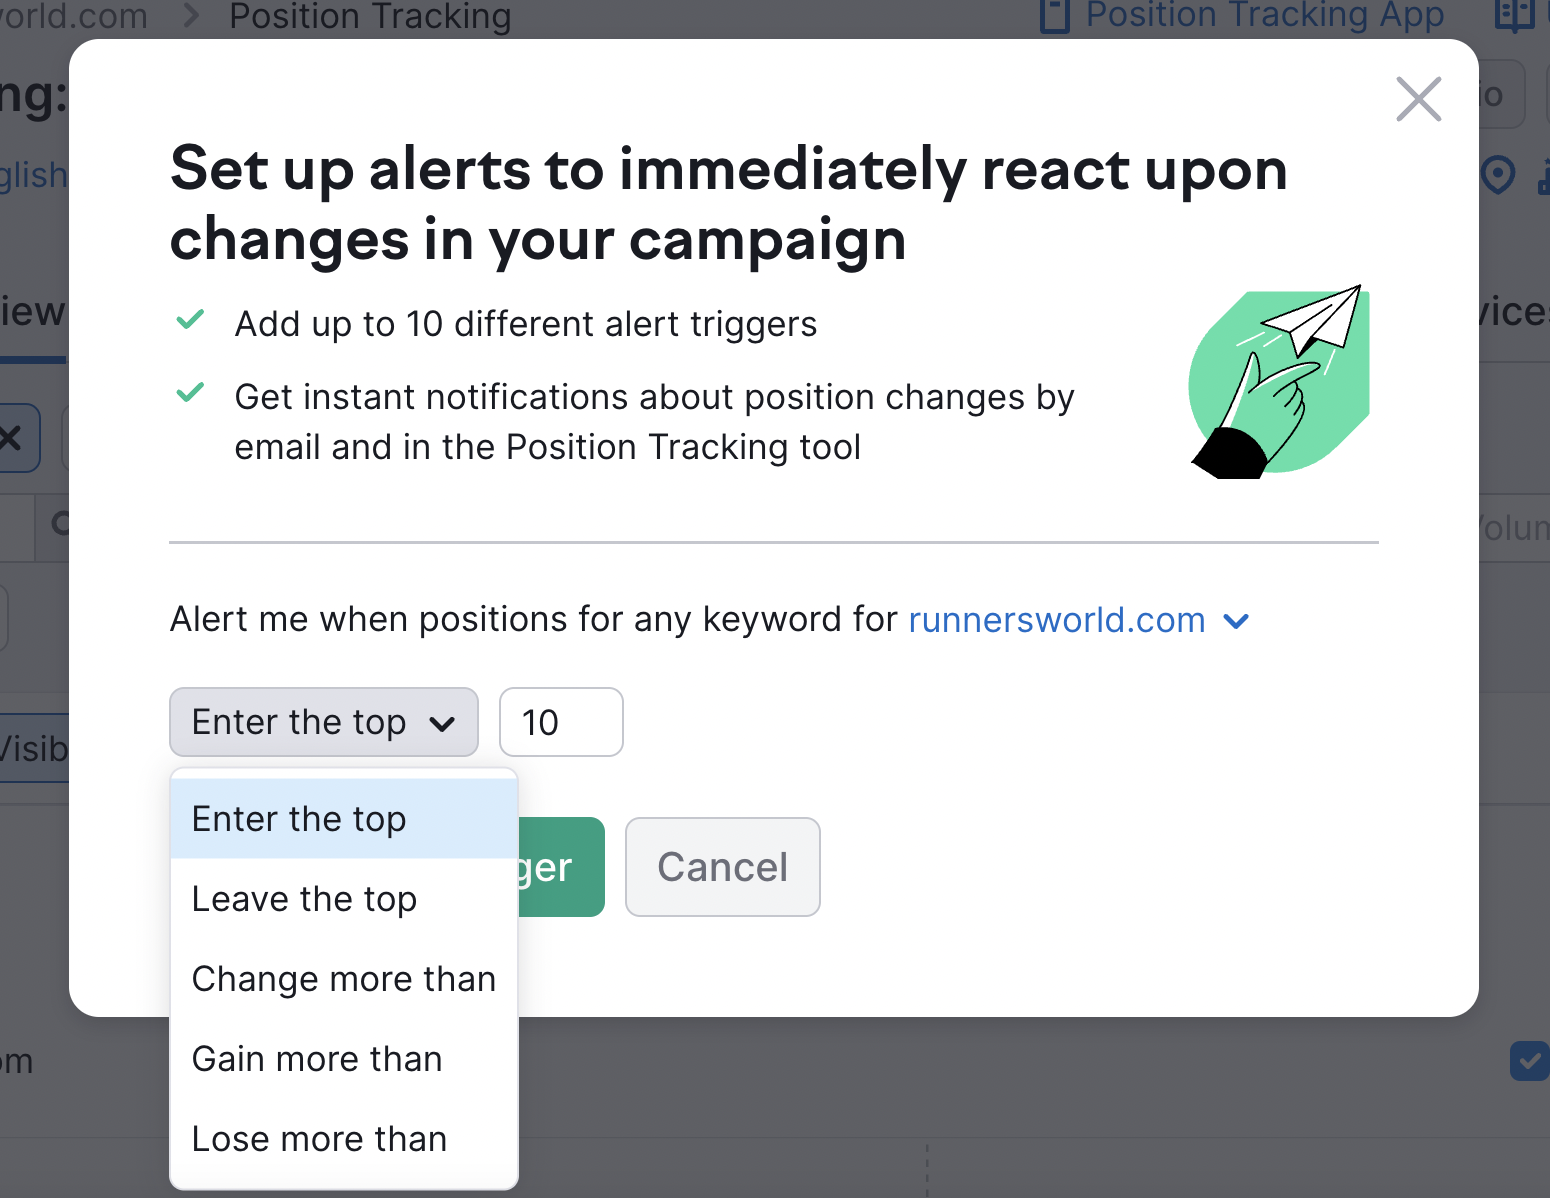 "Set up alerts to immediately react upon changes in your campaign" pop up window